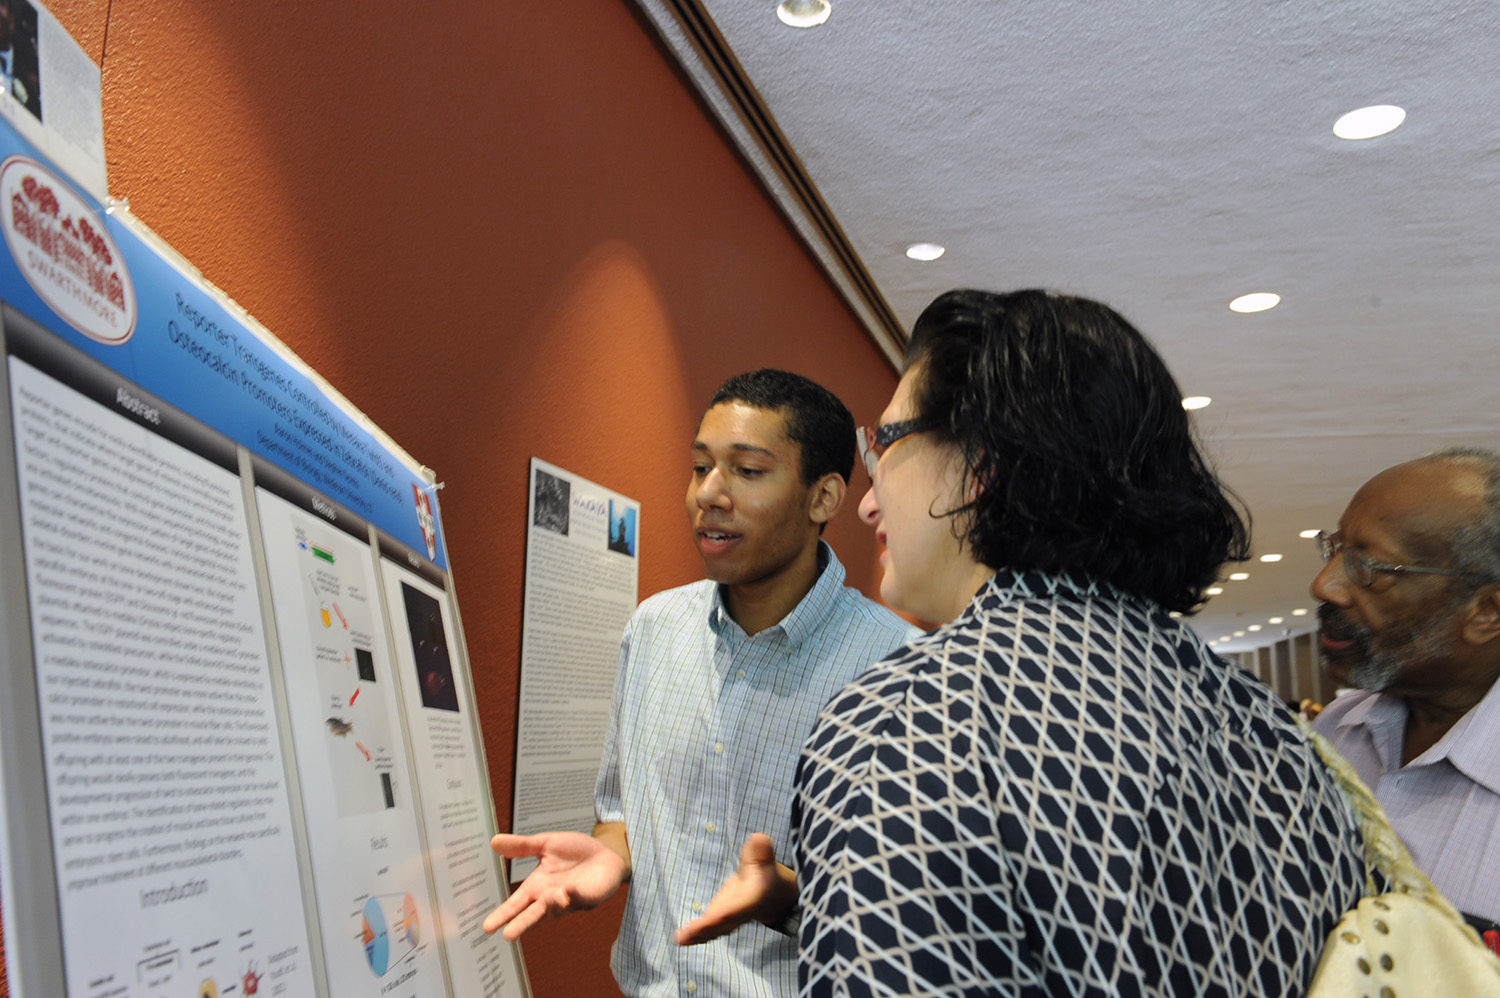 Aaron Holmes ’xx talks to onlookers about his poster, "Reporter Transgenes Controlled by Bone-specific Medaka Promoters Expressed in Zebrafish (Danio rerio)." Holmes' faculty adviser is Stephen Devoto, professor of biology, professor of neuroscience and behavior.